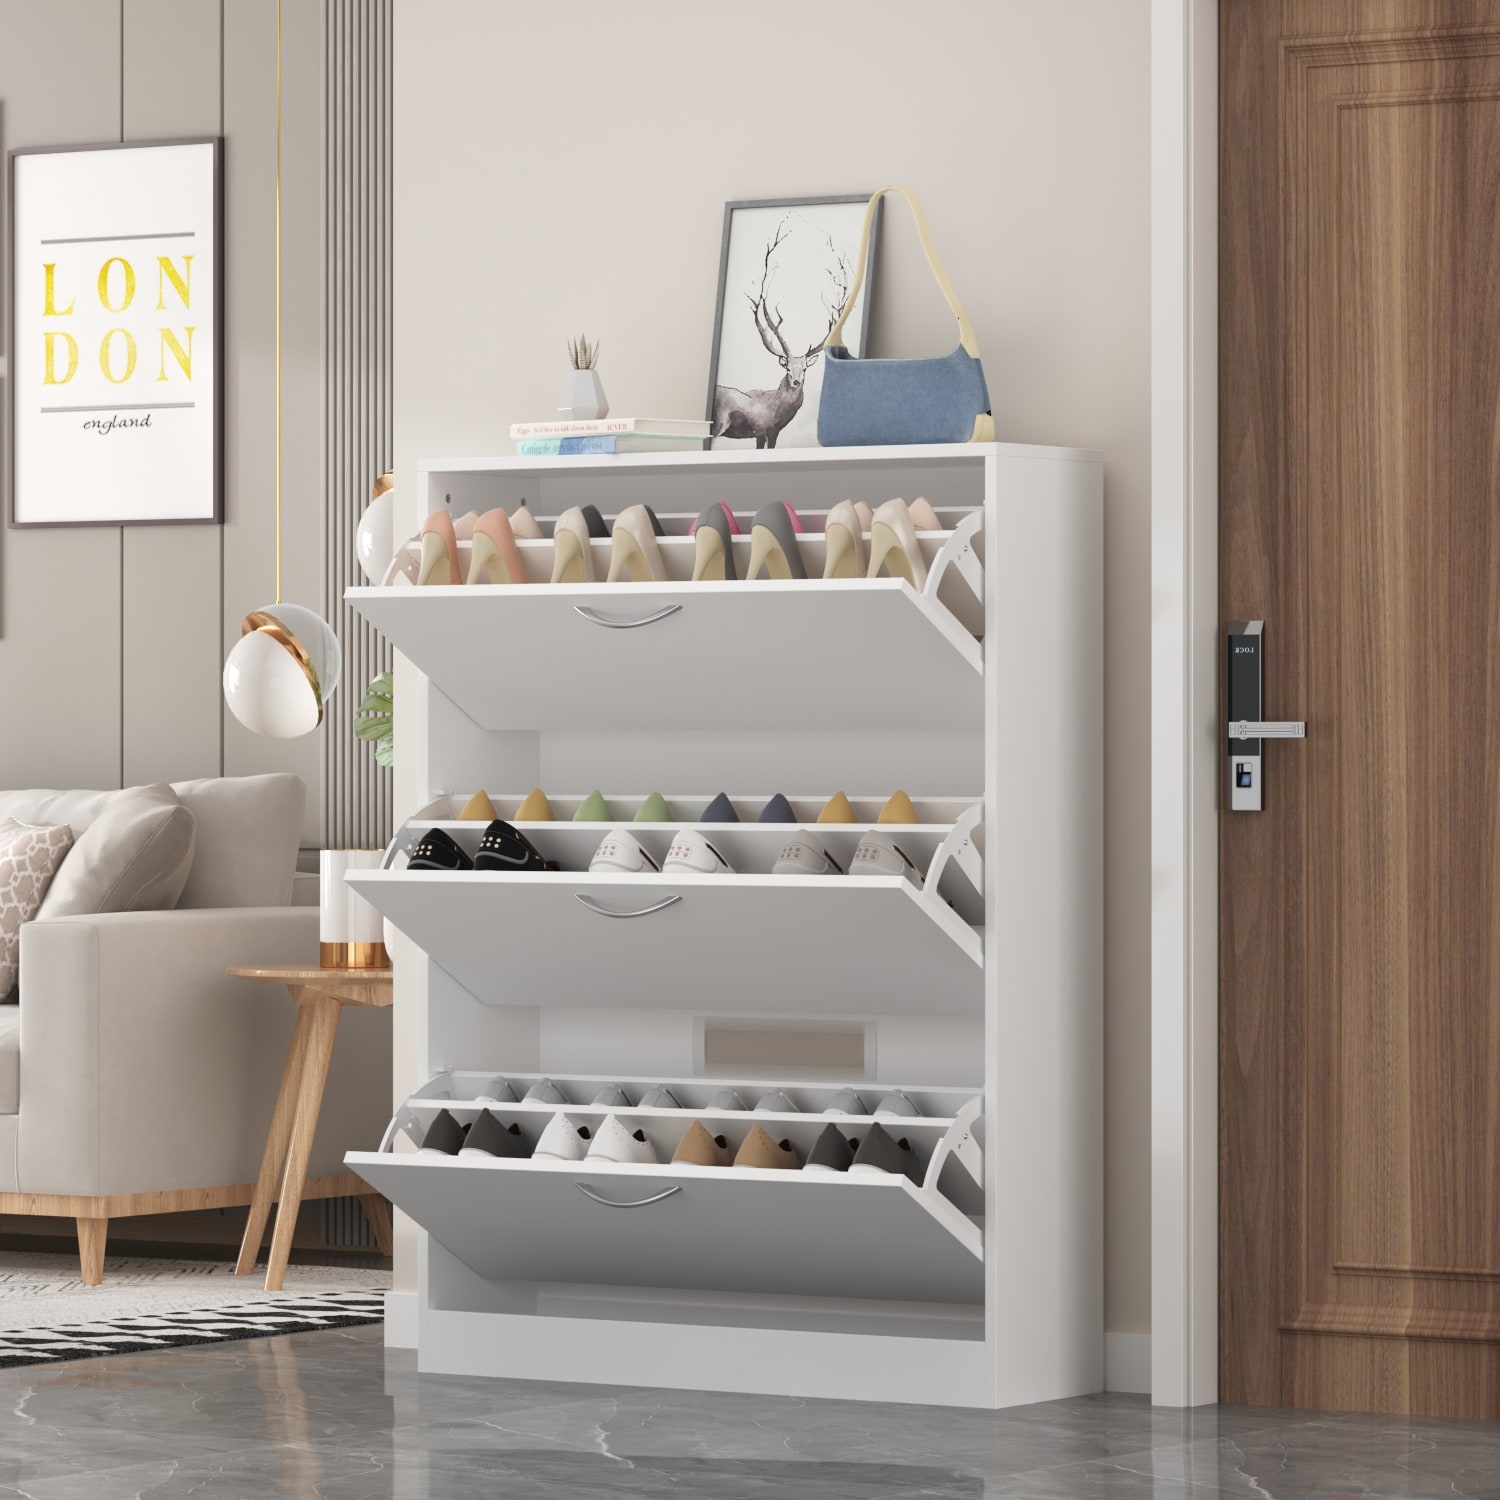 https://ak1.ostkcdn.com/images/products/is/images/direct/f37f05253902e3bb8f4e77c96e3da5954ea57a78/Home-Modern-3-Drawer-Shoe-Cabinet-3-Tier-Shoe-Rack-Storage-Organizer.jpg